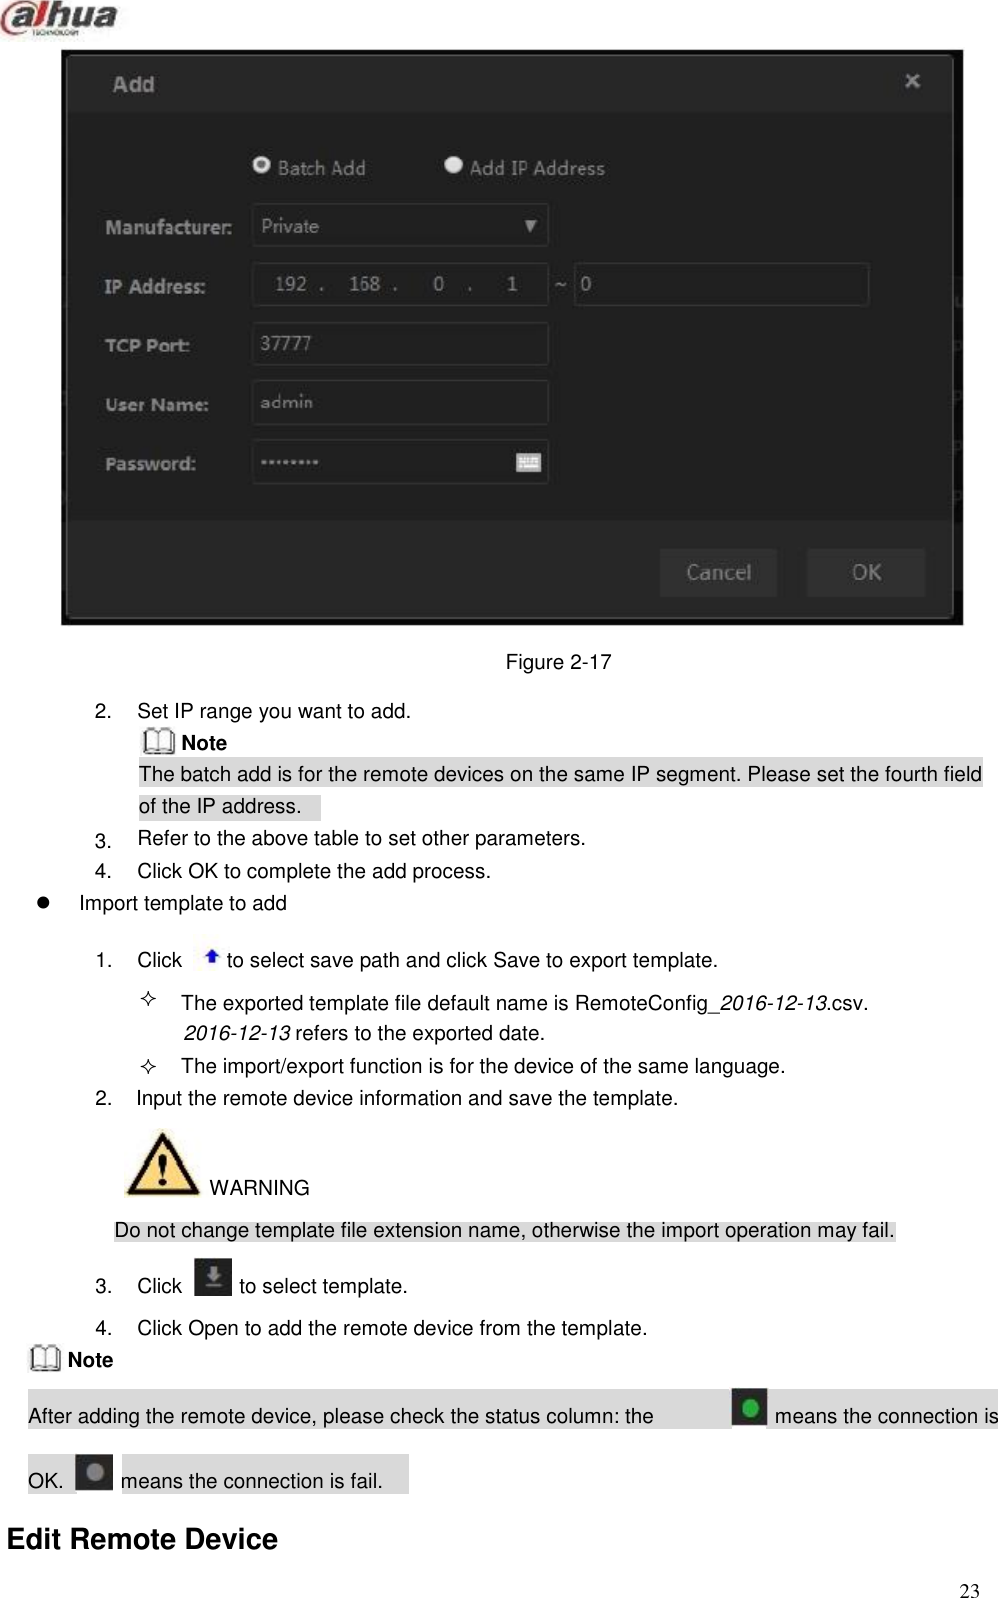                                                     Figure 2-17  2.      3. 4.  Set IP range you want to add. Note The batch add is for the remote devices on the same IP segment. Please set the fourth field of the IP address. Refer to the above table to set other parameters. Click OK to complete the add process.  Import template to add  1.  Click   to select save path and click Save to export template.   The exported template file default name is RemoteConfig_2016-12-13.csv. 2016-12-13 refers to the exported date. The import/export function is for the device of the same language. 2.  Input the remote device information and save the template.    WARNING  Do not change template file extension name, otherwise the import operation may fail.  3.  Click   to select template.  4. Note  Click Open to add the remote device from the template.  After adding the remote device, please check the status column: the   means the connection is   OK.   means the connection is fail.  Edit Remote Device  23